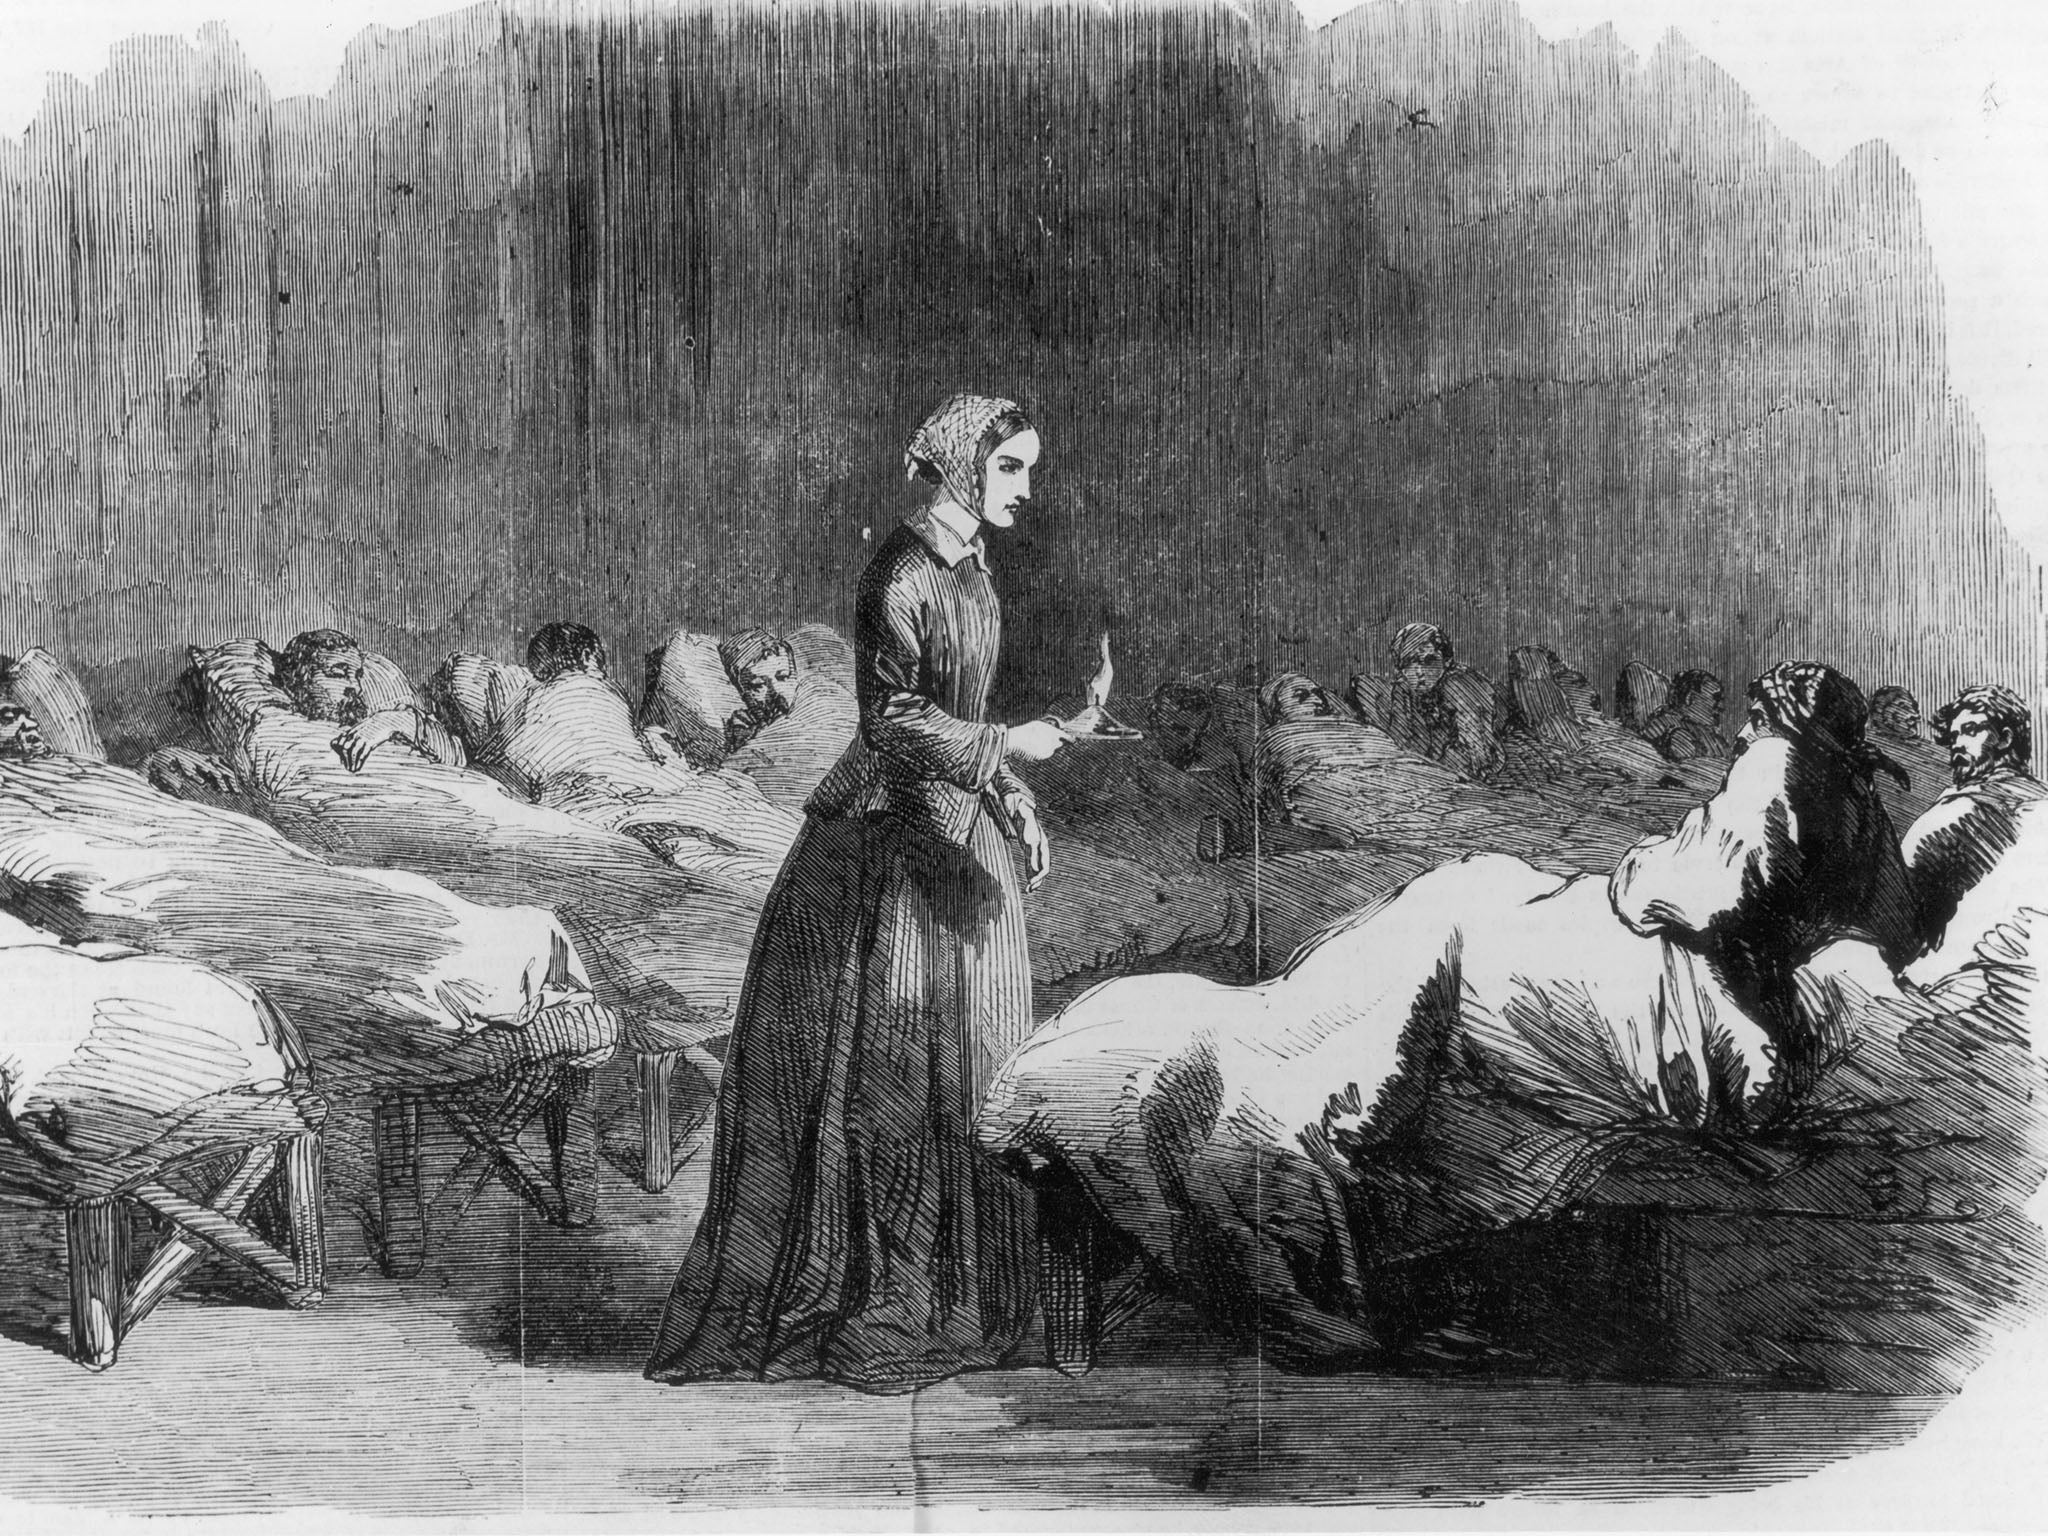 Florence Nightingale makes her rounds in the Barrack hospital at Scutari during the Crimean War in 1855